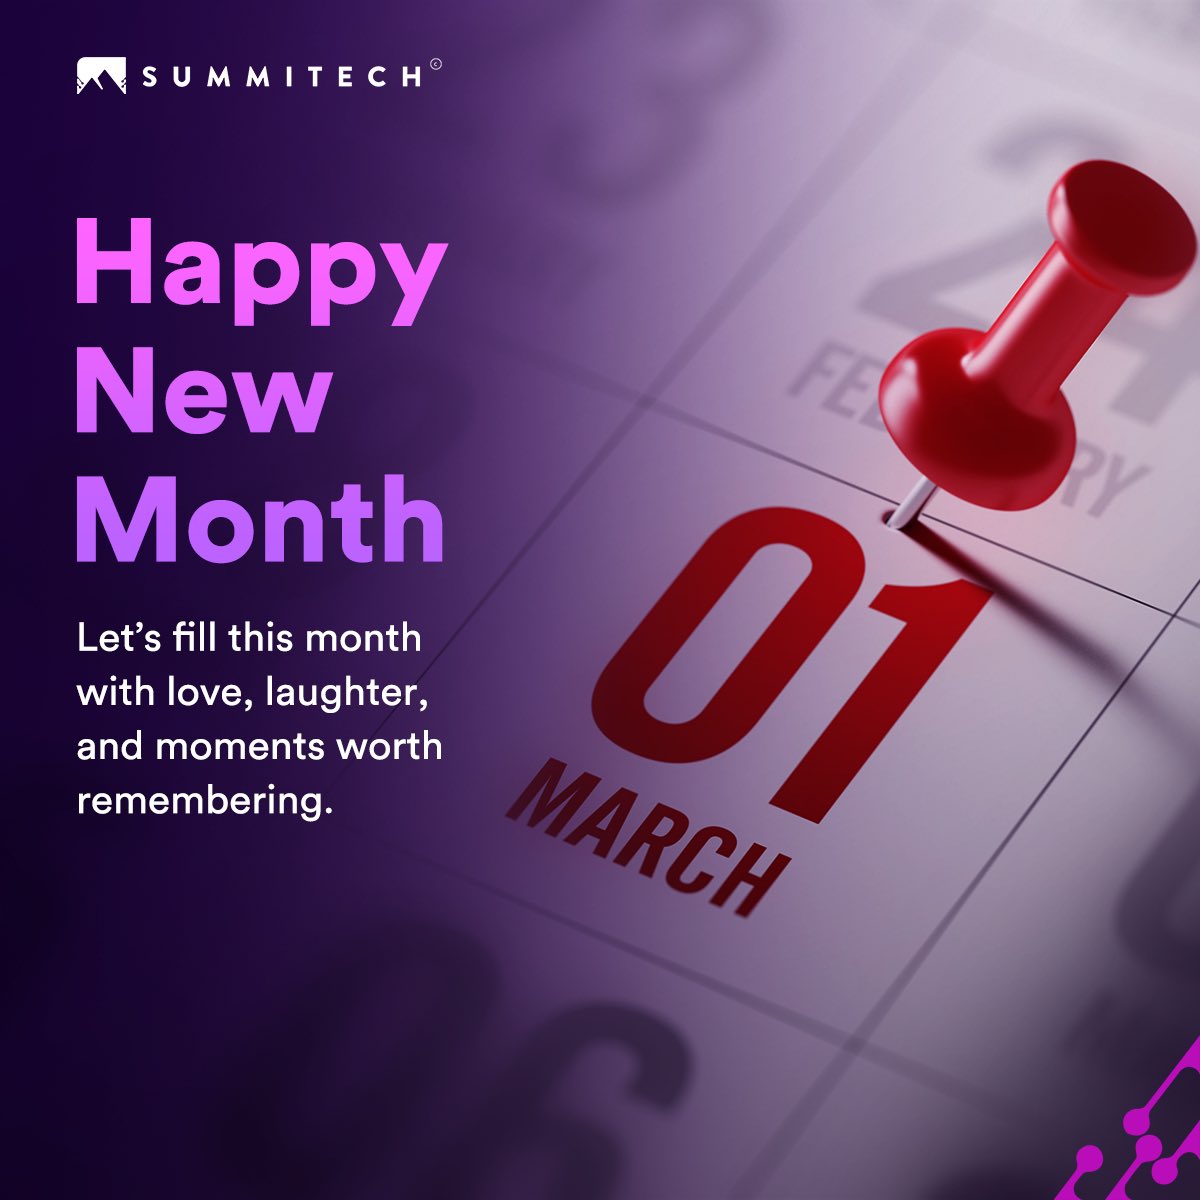 Cheers to a brand new month filled with endless possibilities, opportunities, and adventures.

Happy New Month.

#happynewmonth #march #newmonth #morepossibilities #summitech